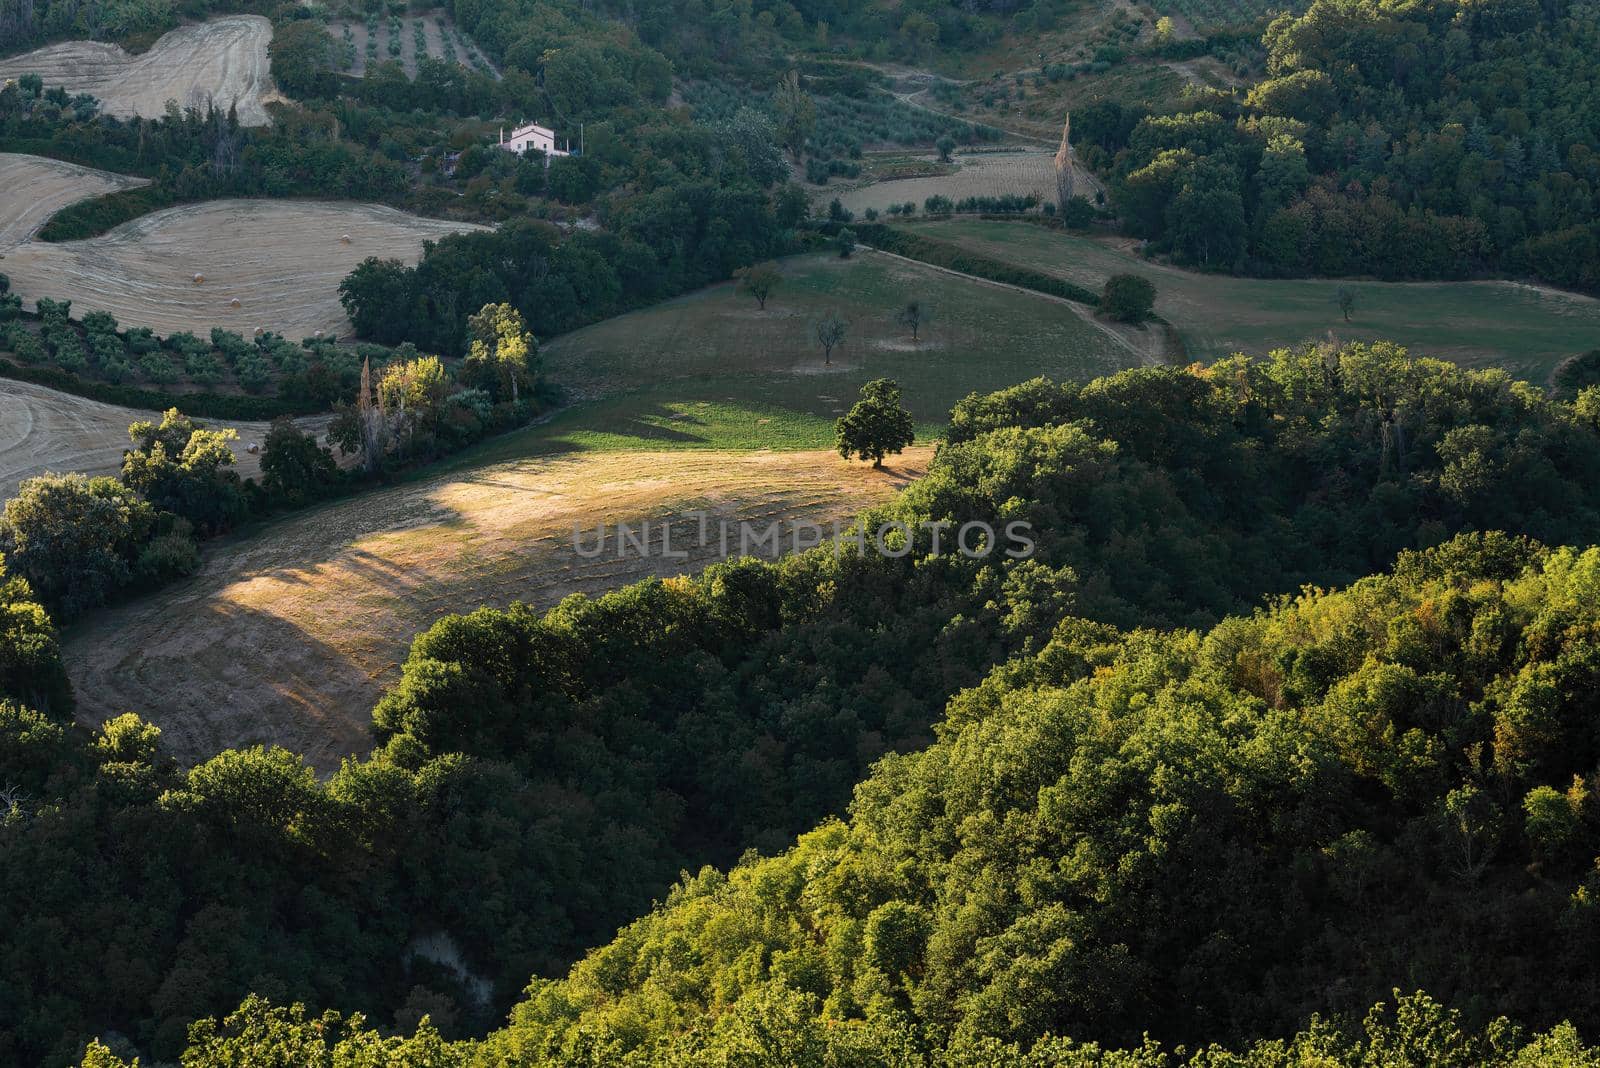 View of the fields and trees near Belvedere Fogliense in the Marche region of Italy, at evening before the sun sets.